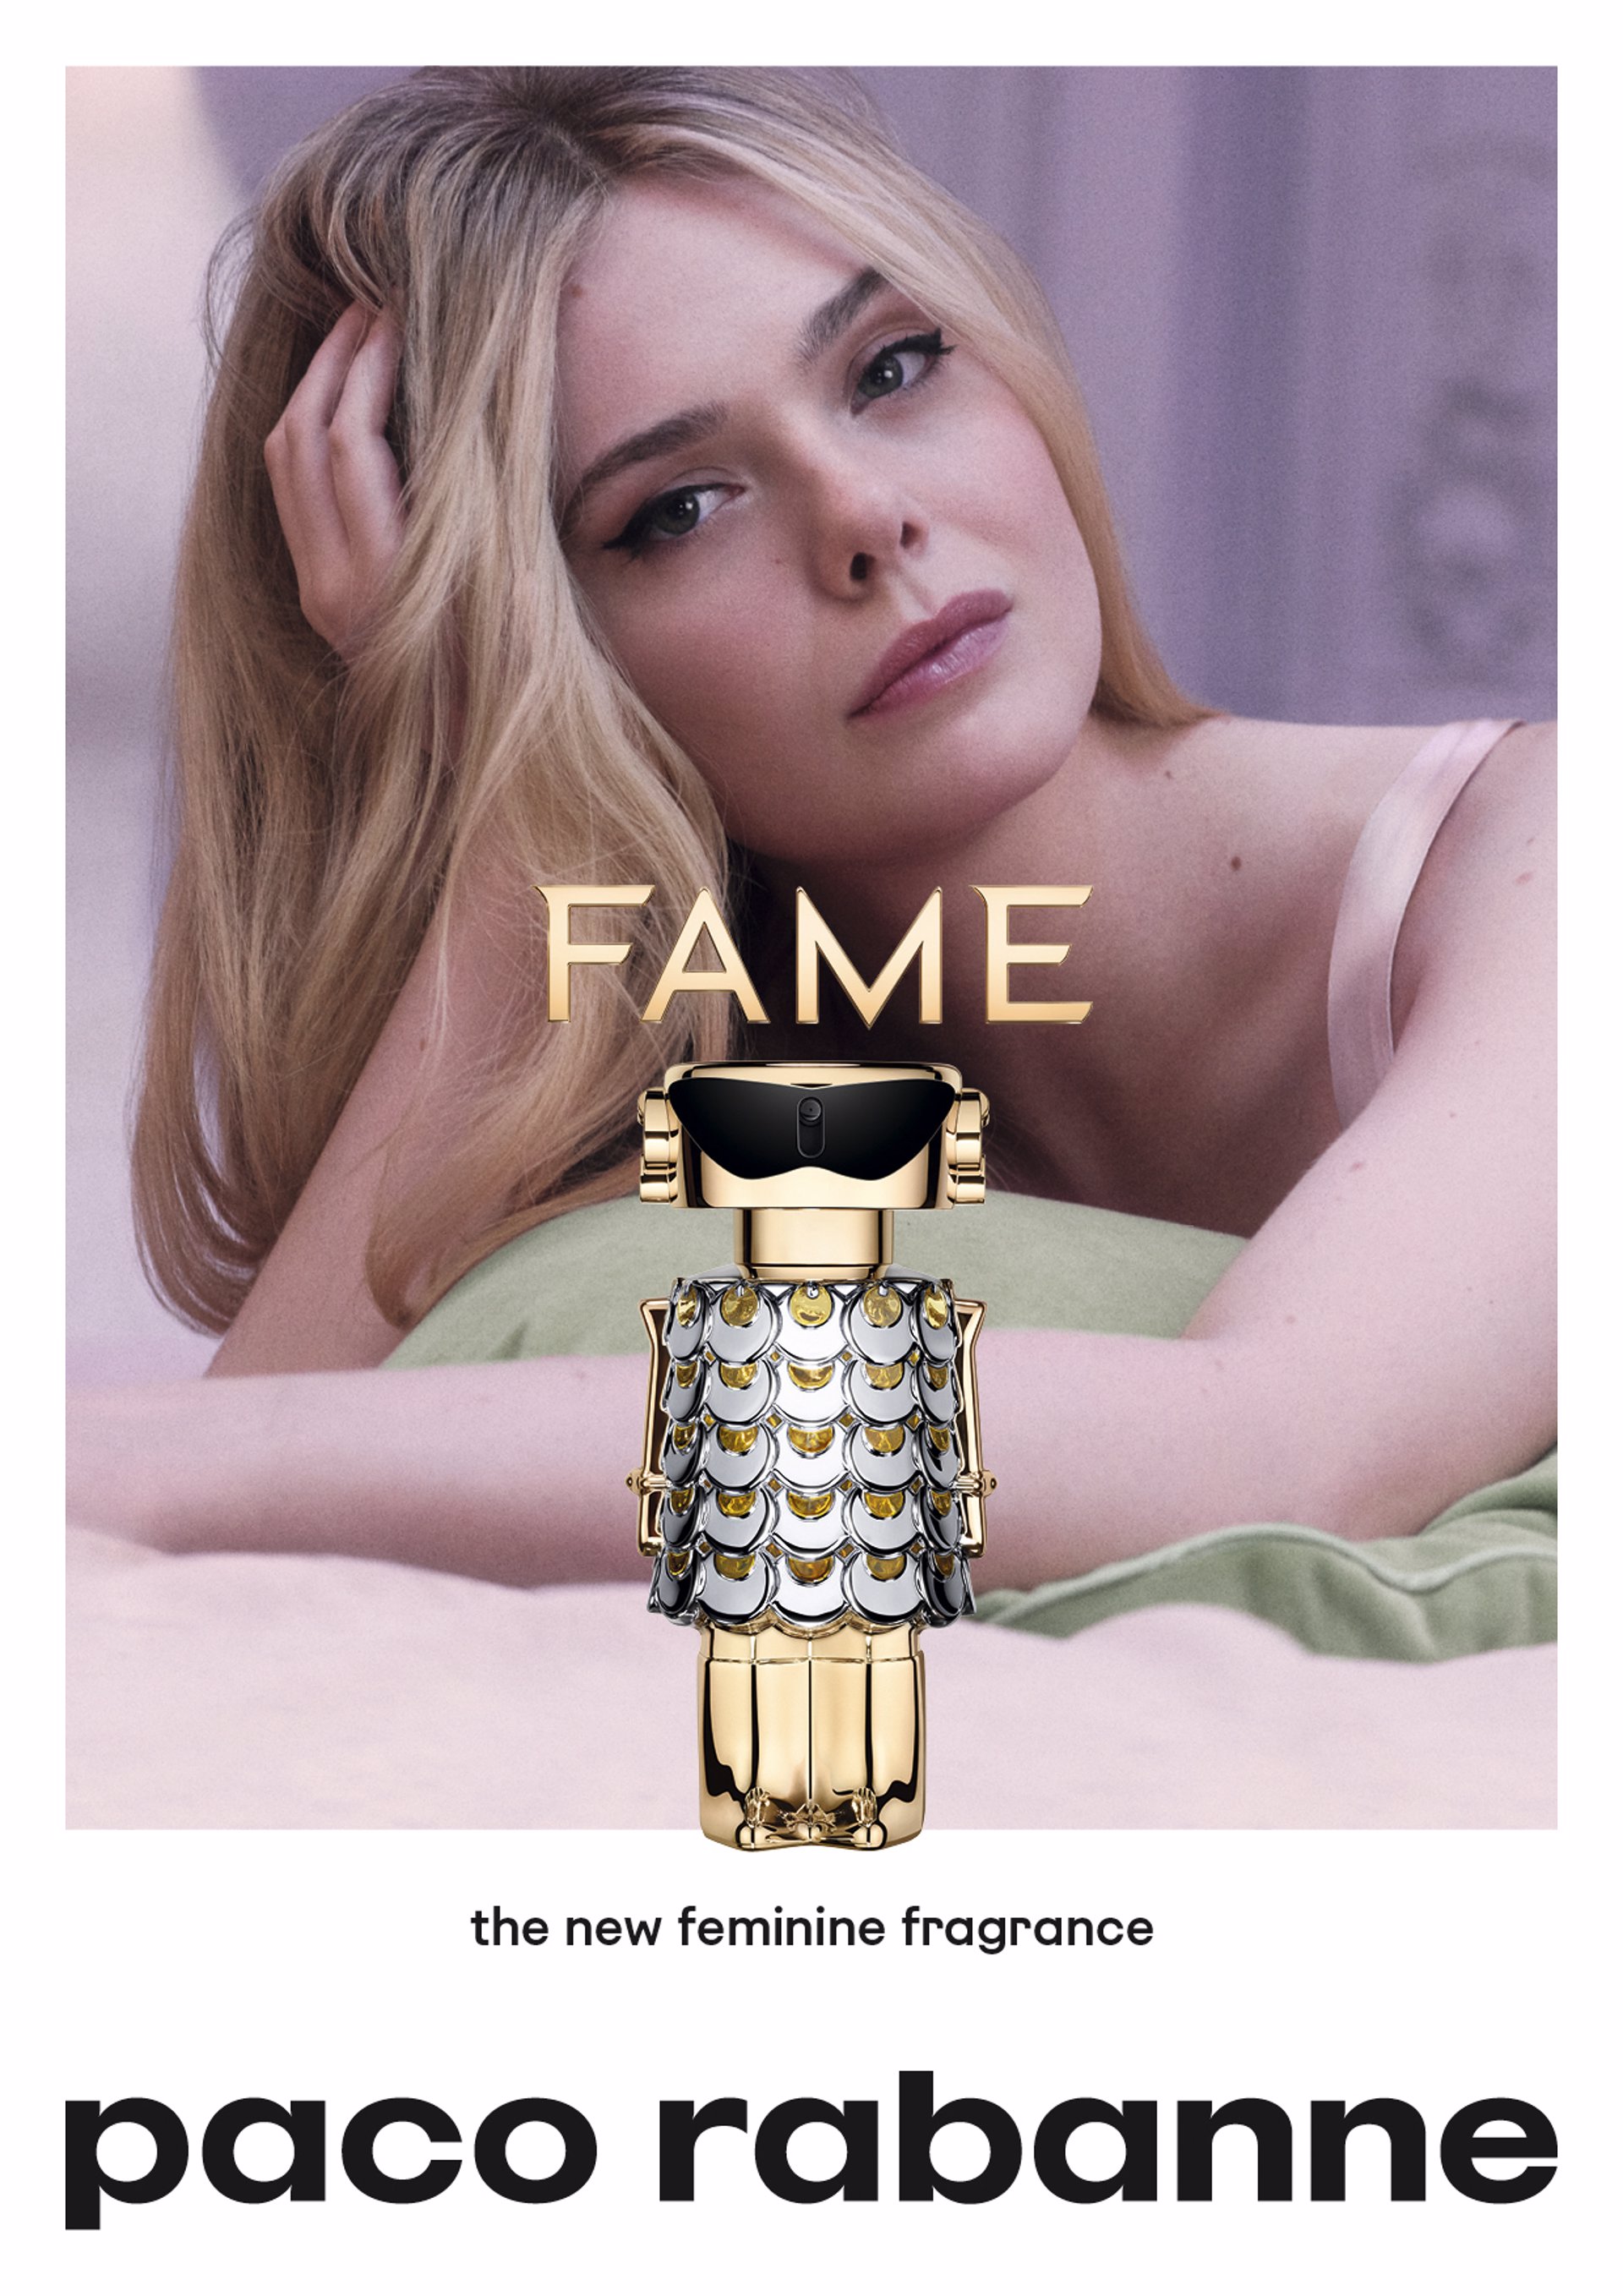 Elle Fanning, ambassador of the new women's fragrance by Paco Rabanne